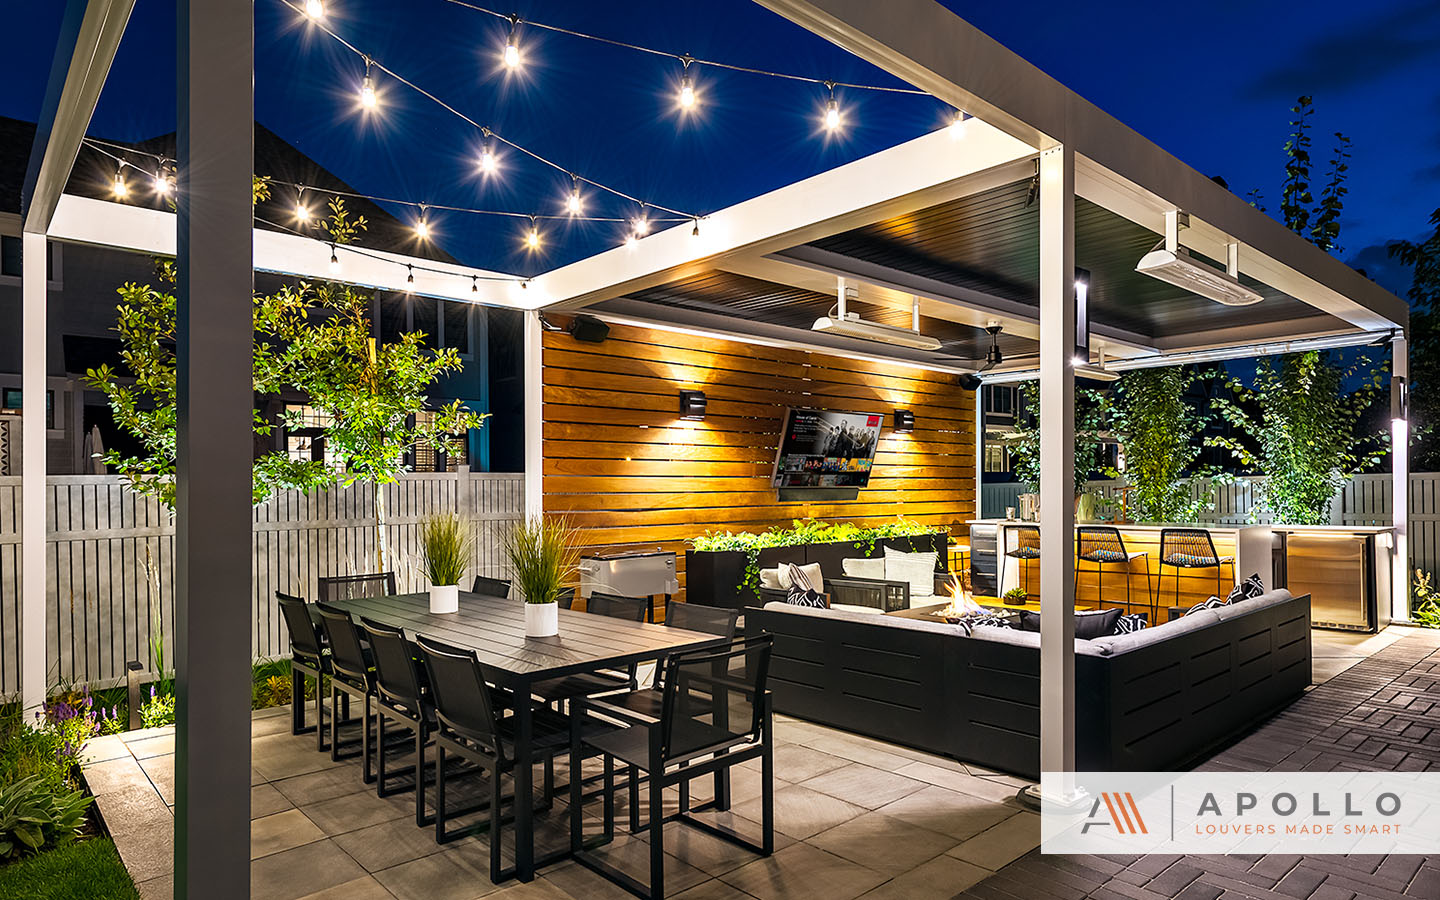 Contemporary motorized pergola w/ heaters, fans covers outdoor entertainment area w/ TV, fireplace, BBQ & seating.